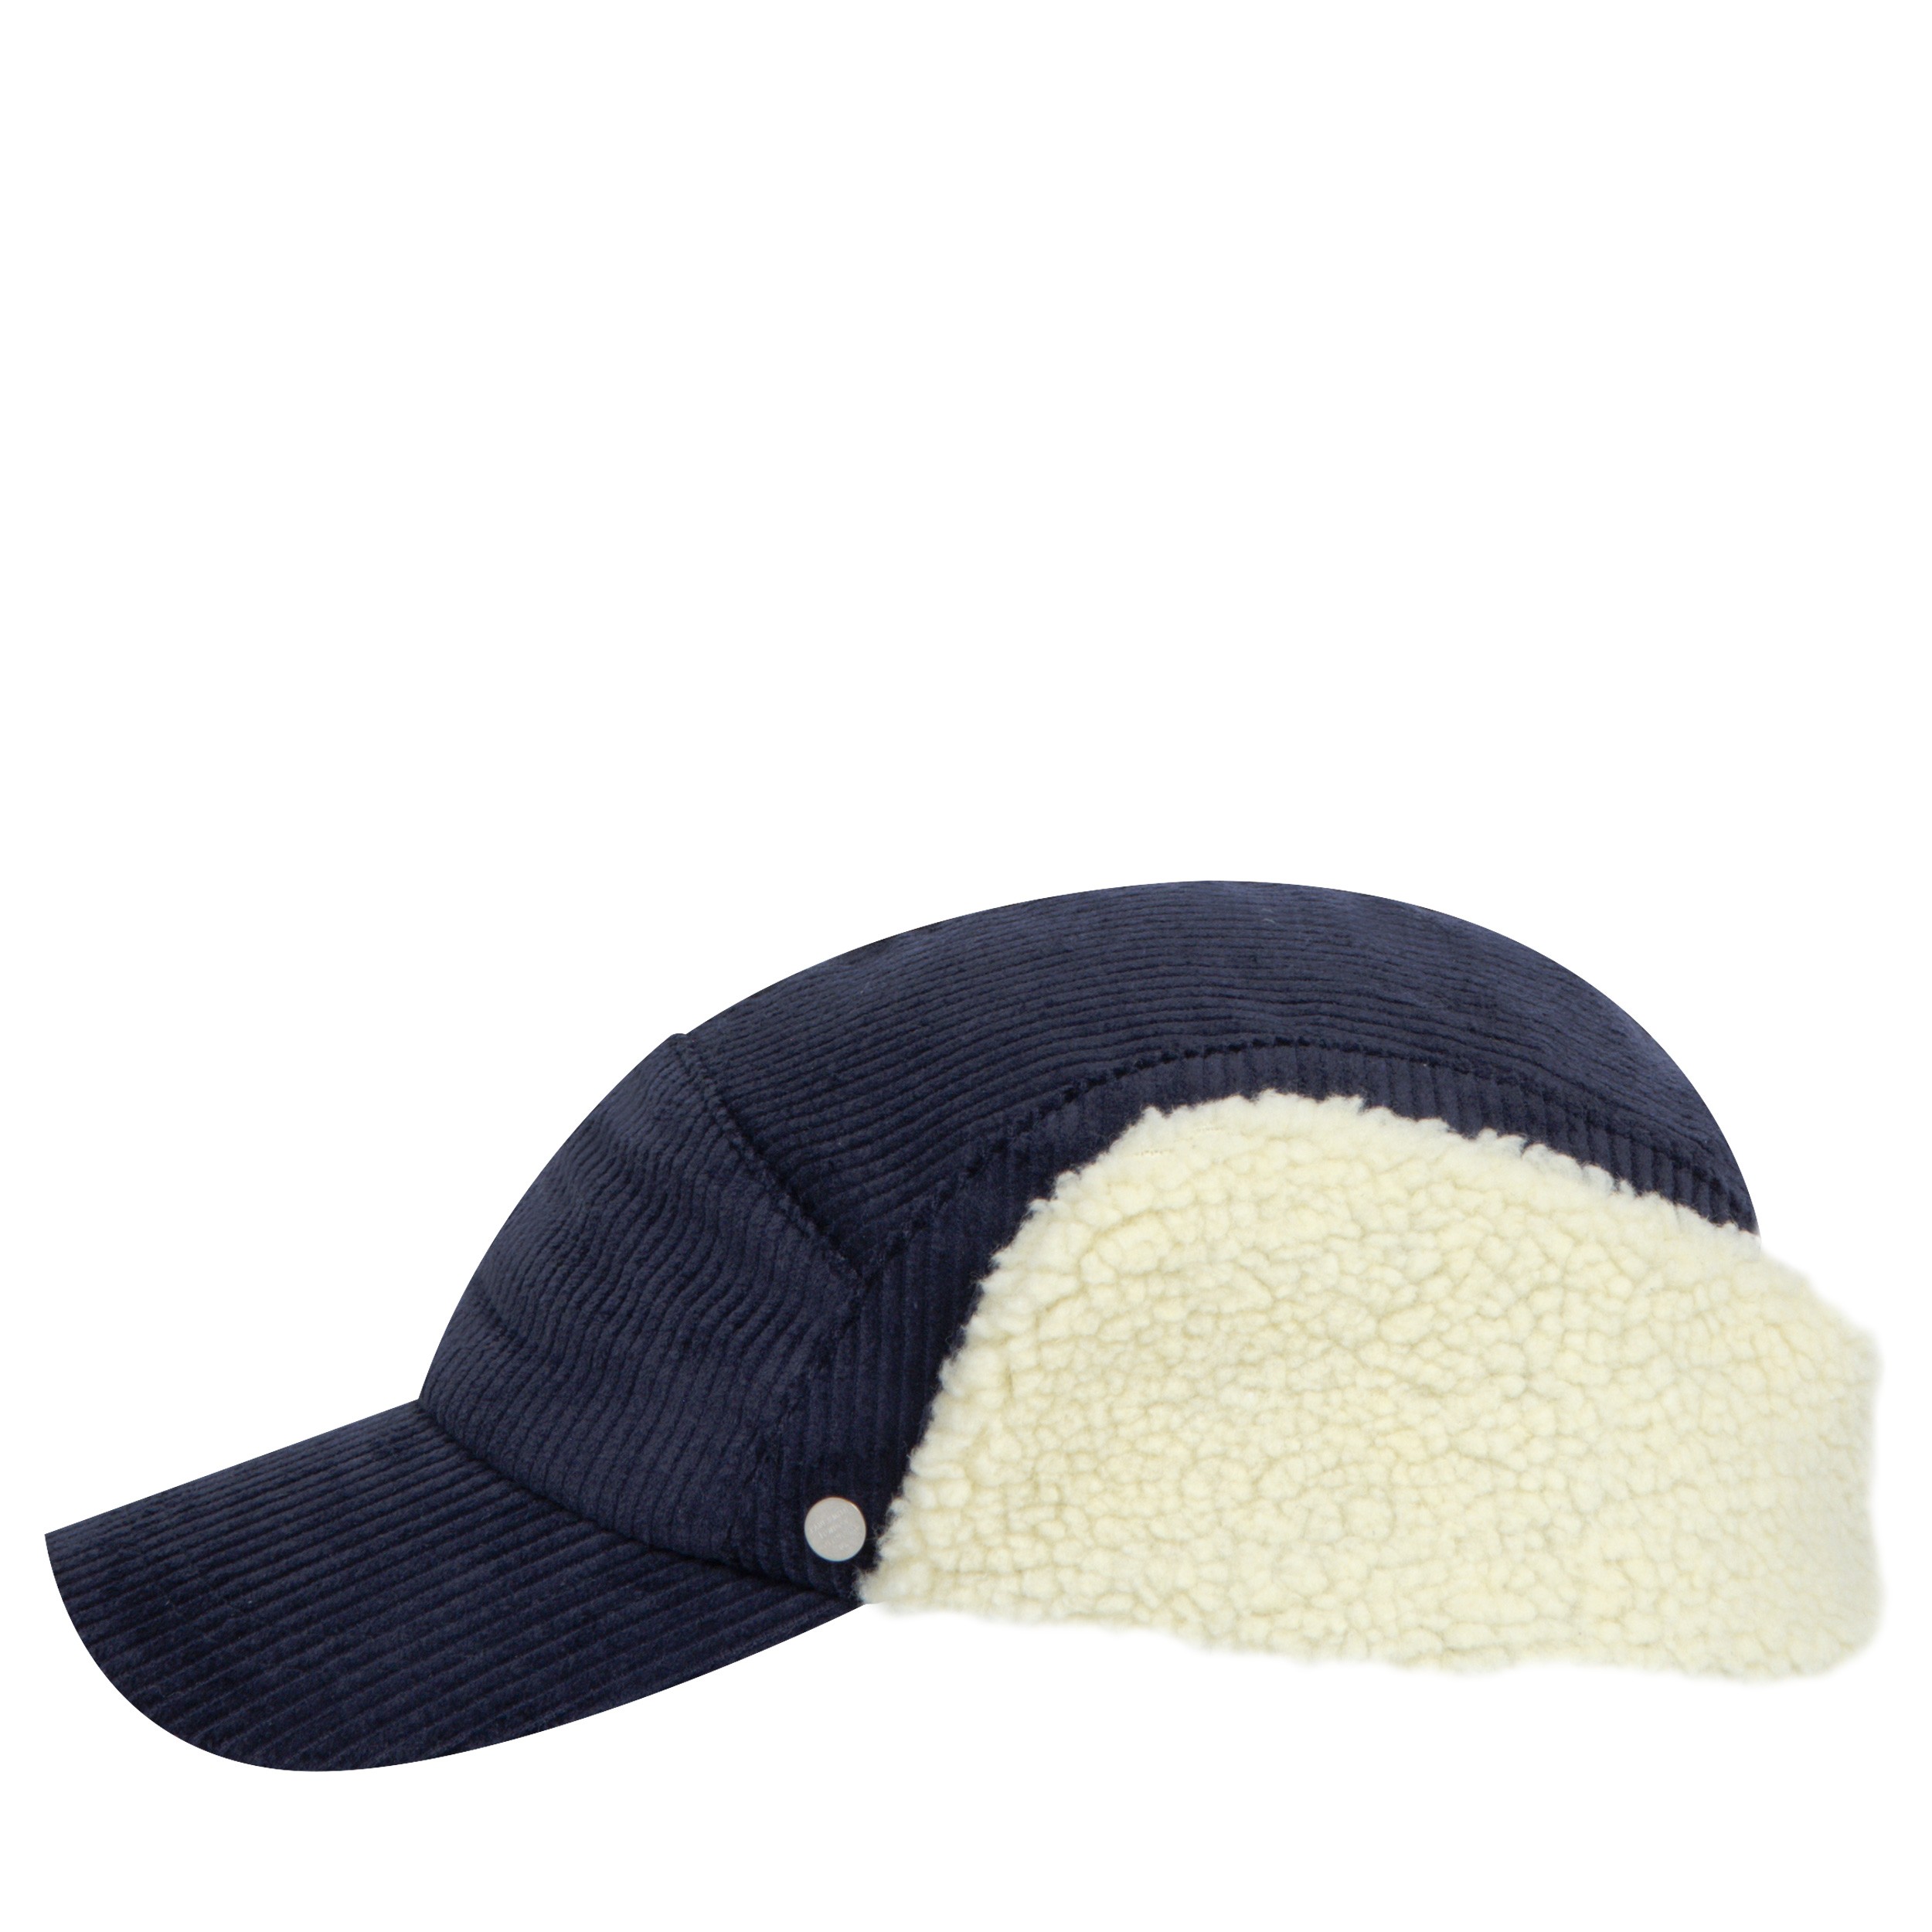 Paul Smith 'Corduroy' Shearling Lined Cap Navy